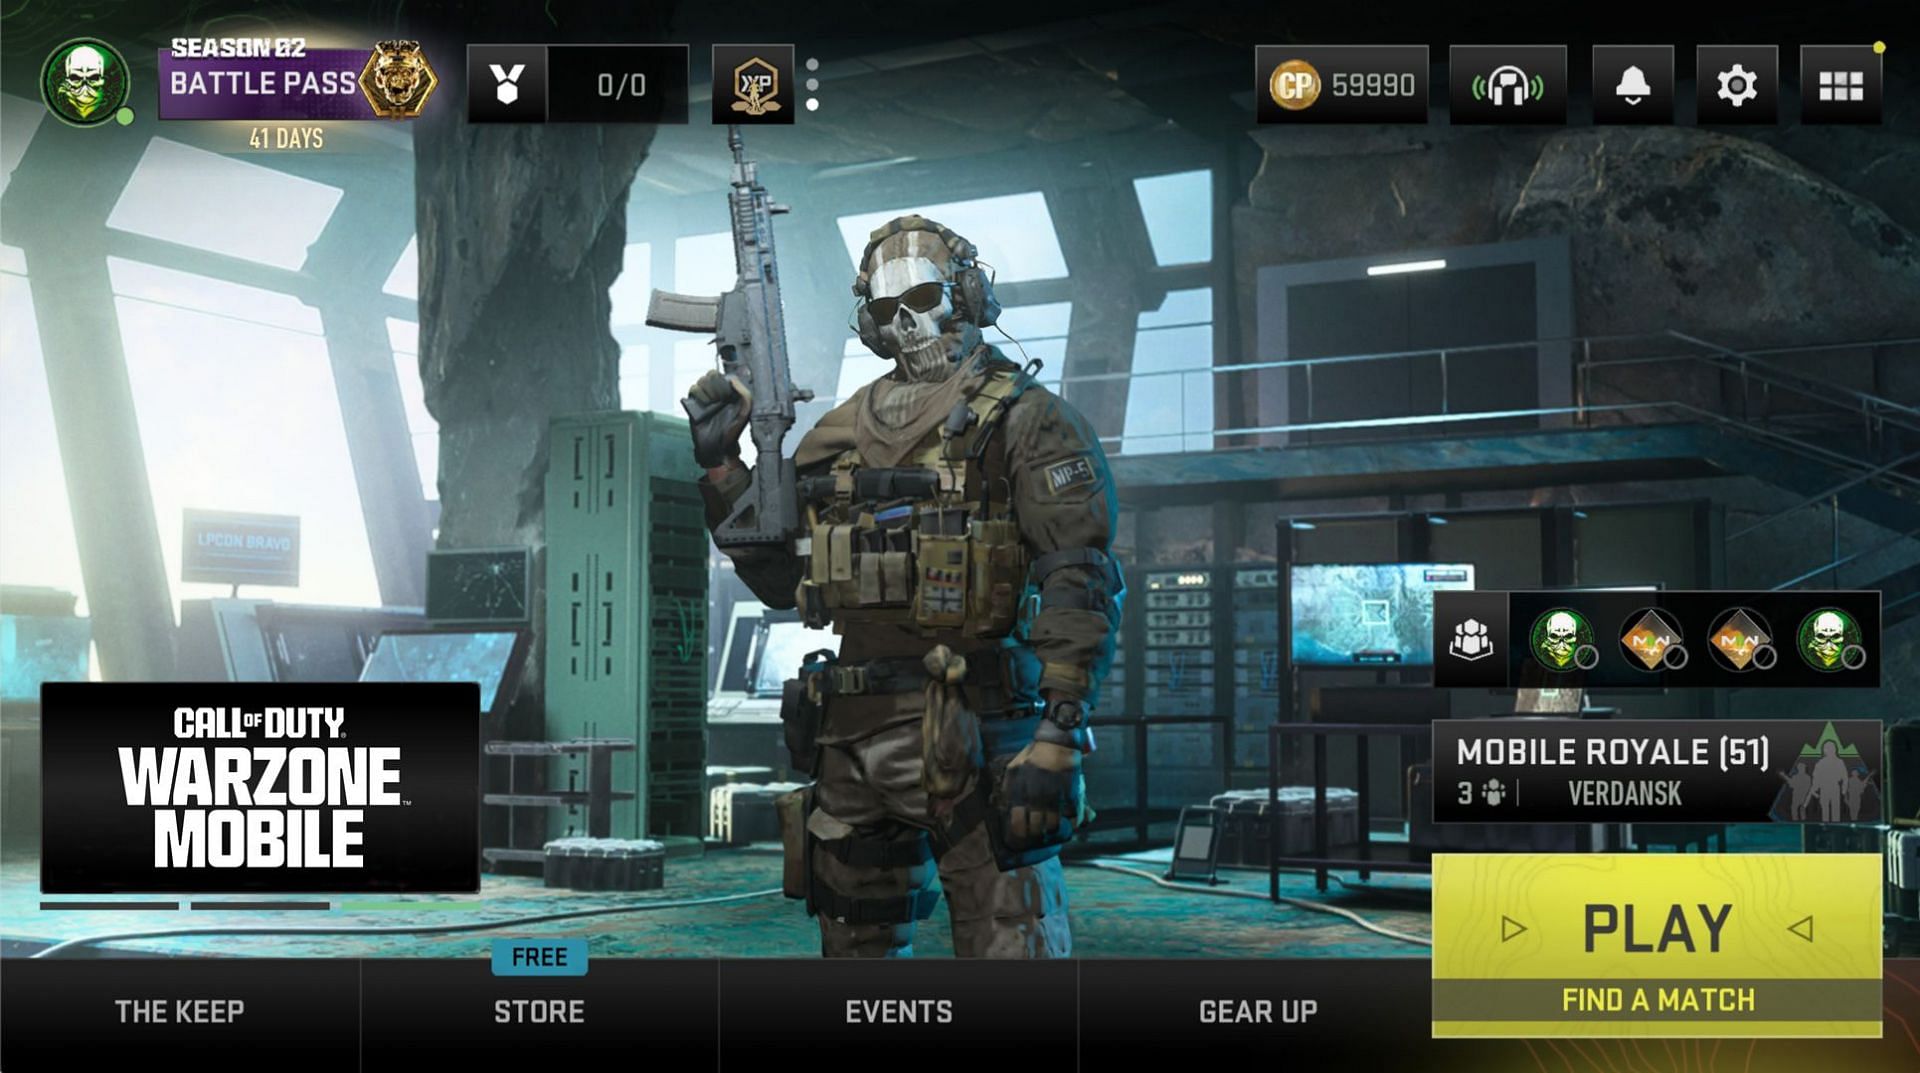 UI of Warzone Mobile (Image via Activision)